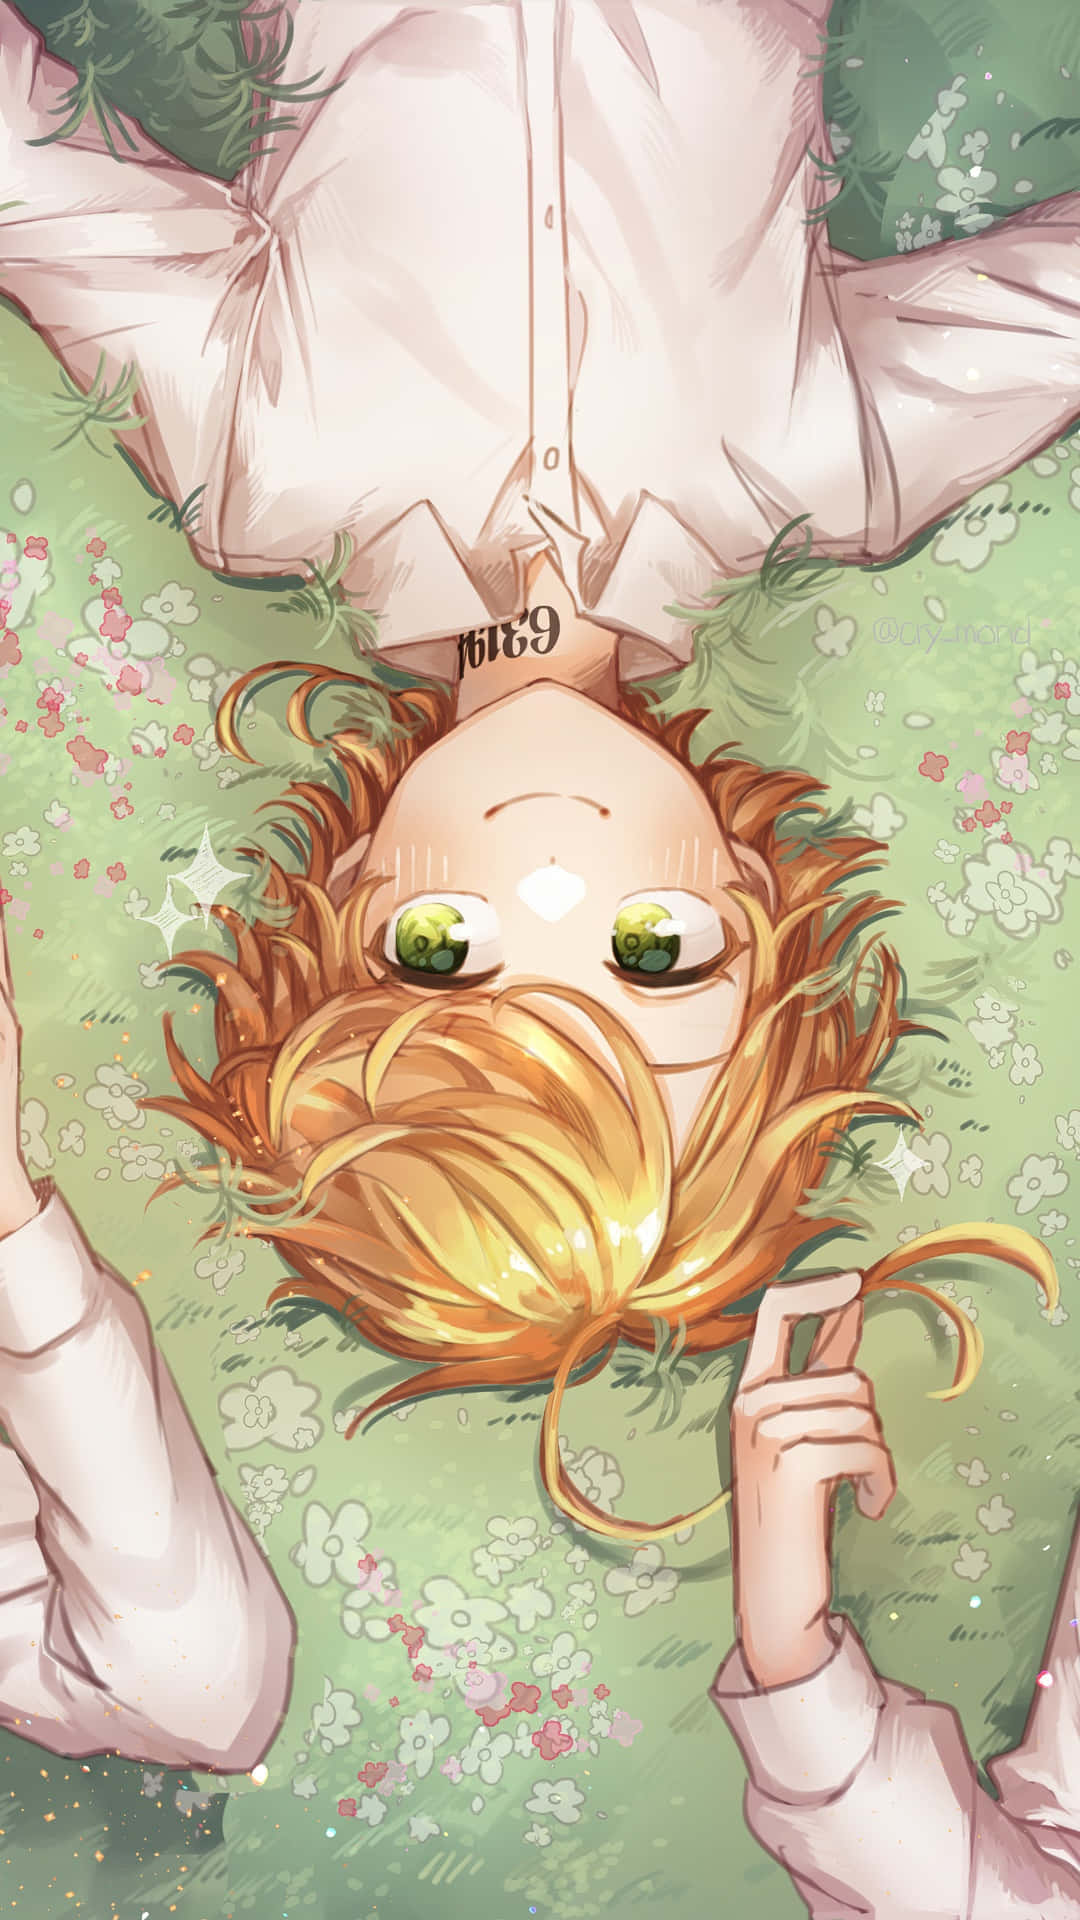 Emma and her friends in 'Ray The Promised Neverland'. Wallpaper